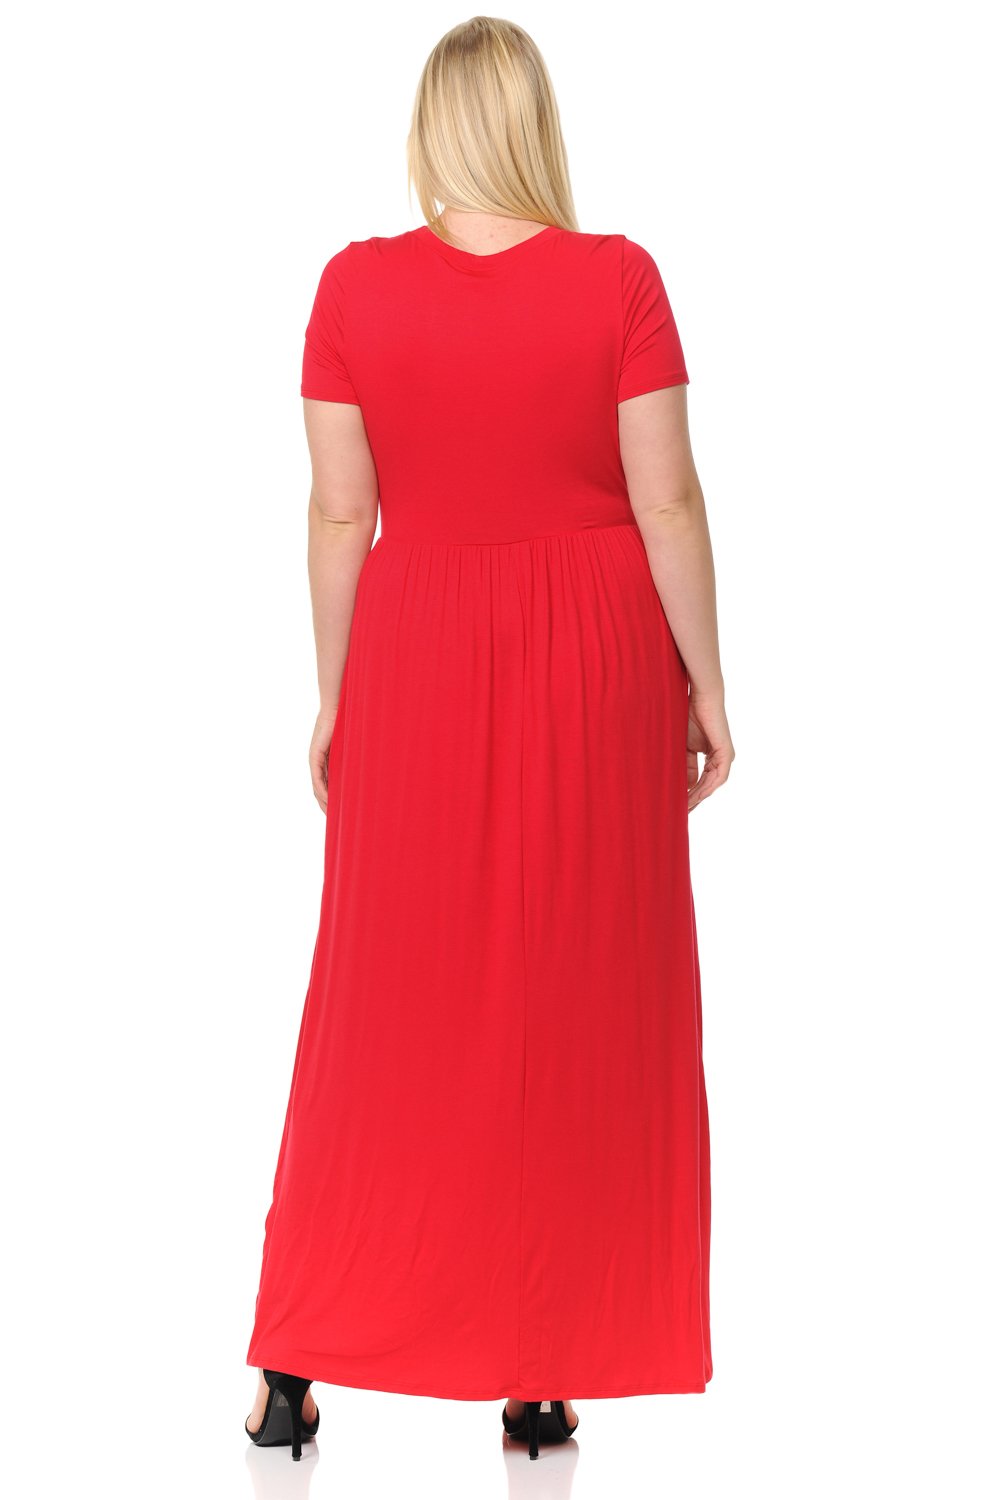 Short Sleeve Maxi Dress with Pockets Plus Size